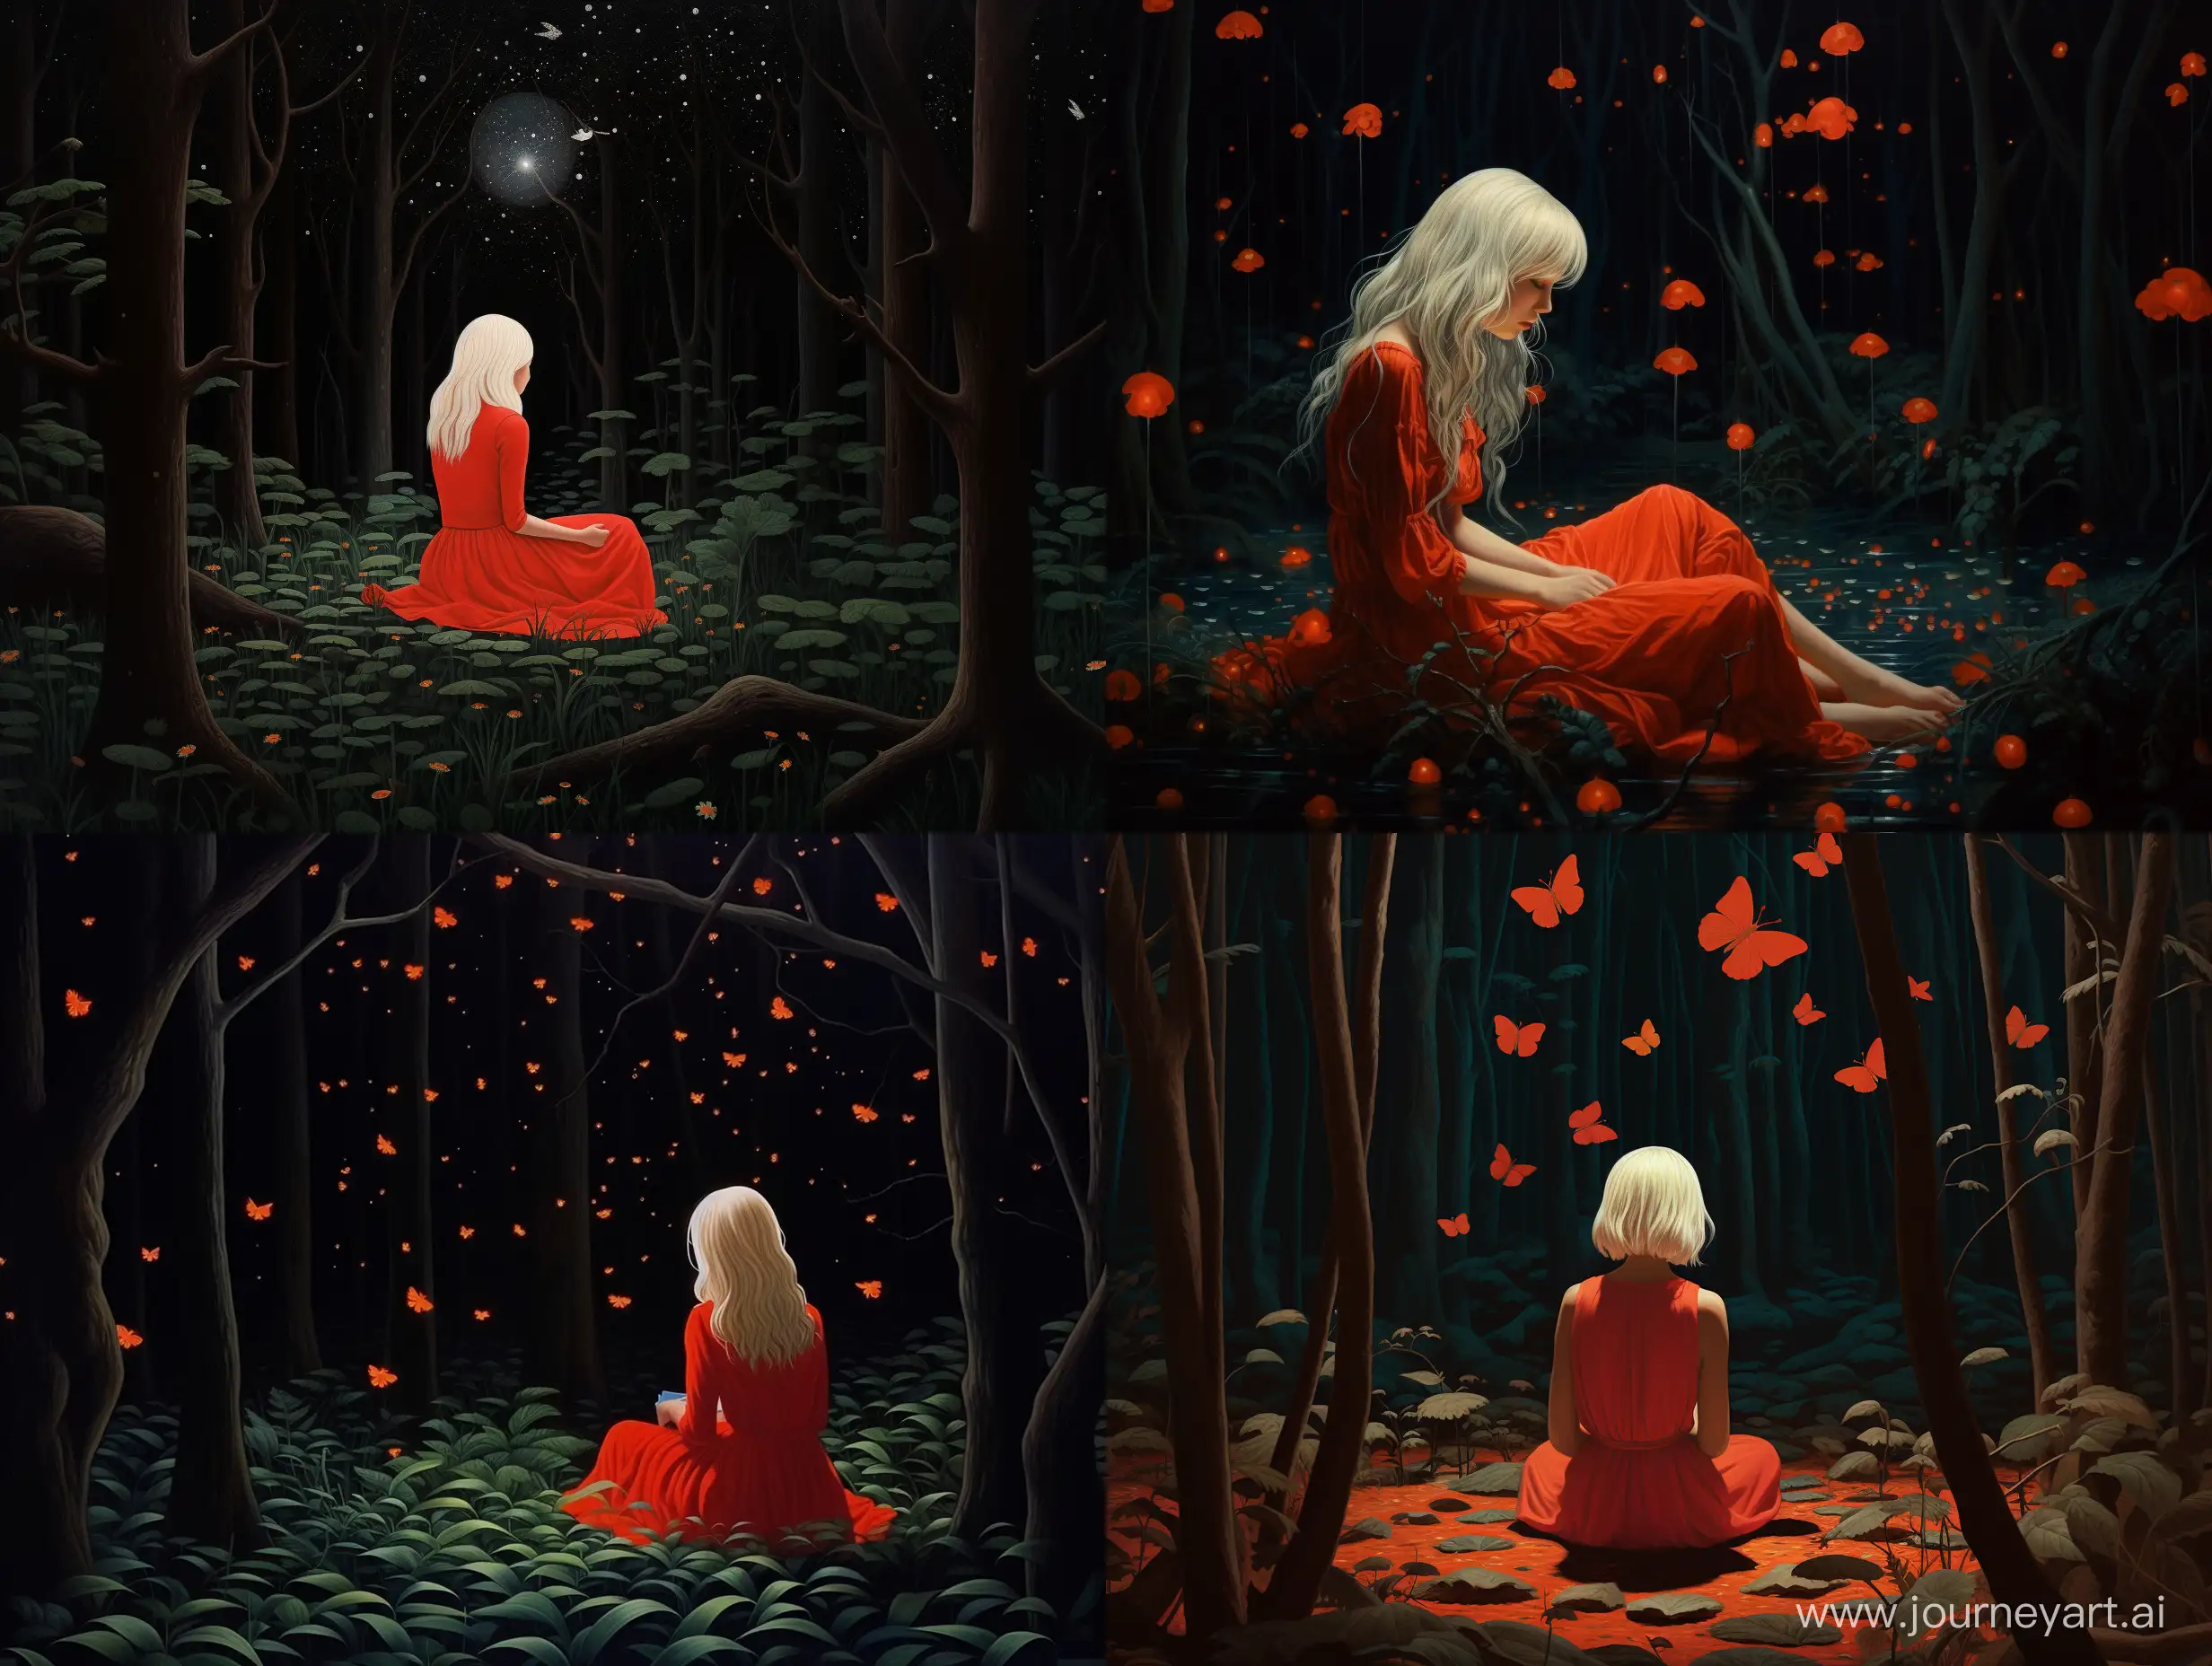 Enchanting-Forest-Scene-WhiteHaired-Girl-in-Lush-Red-Dress-Amidst-Fireflies